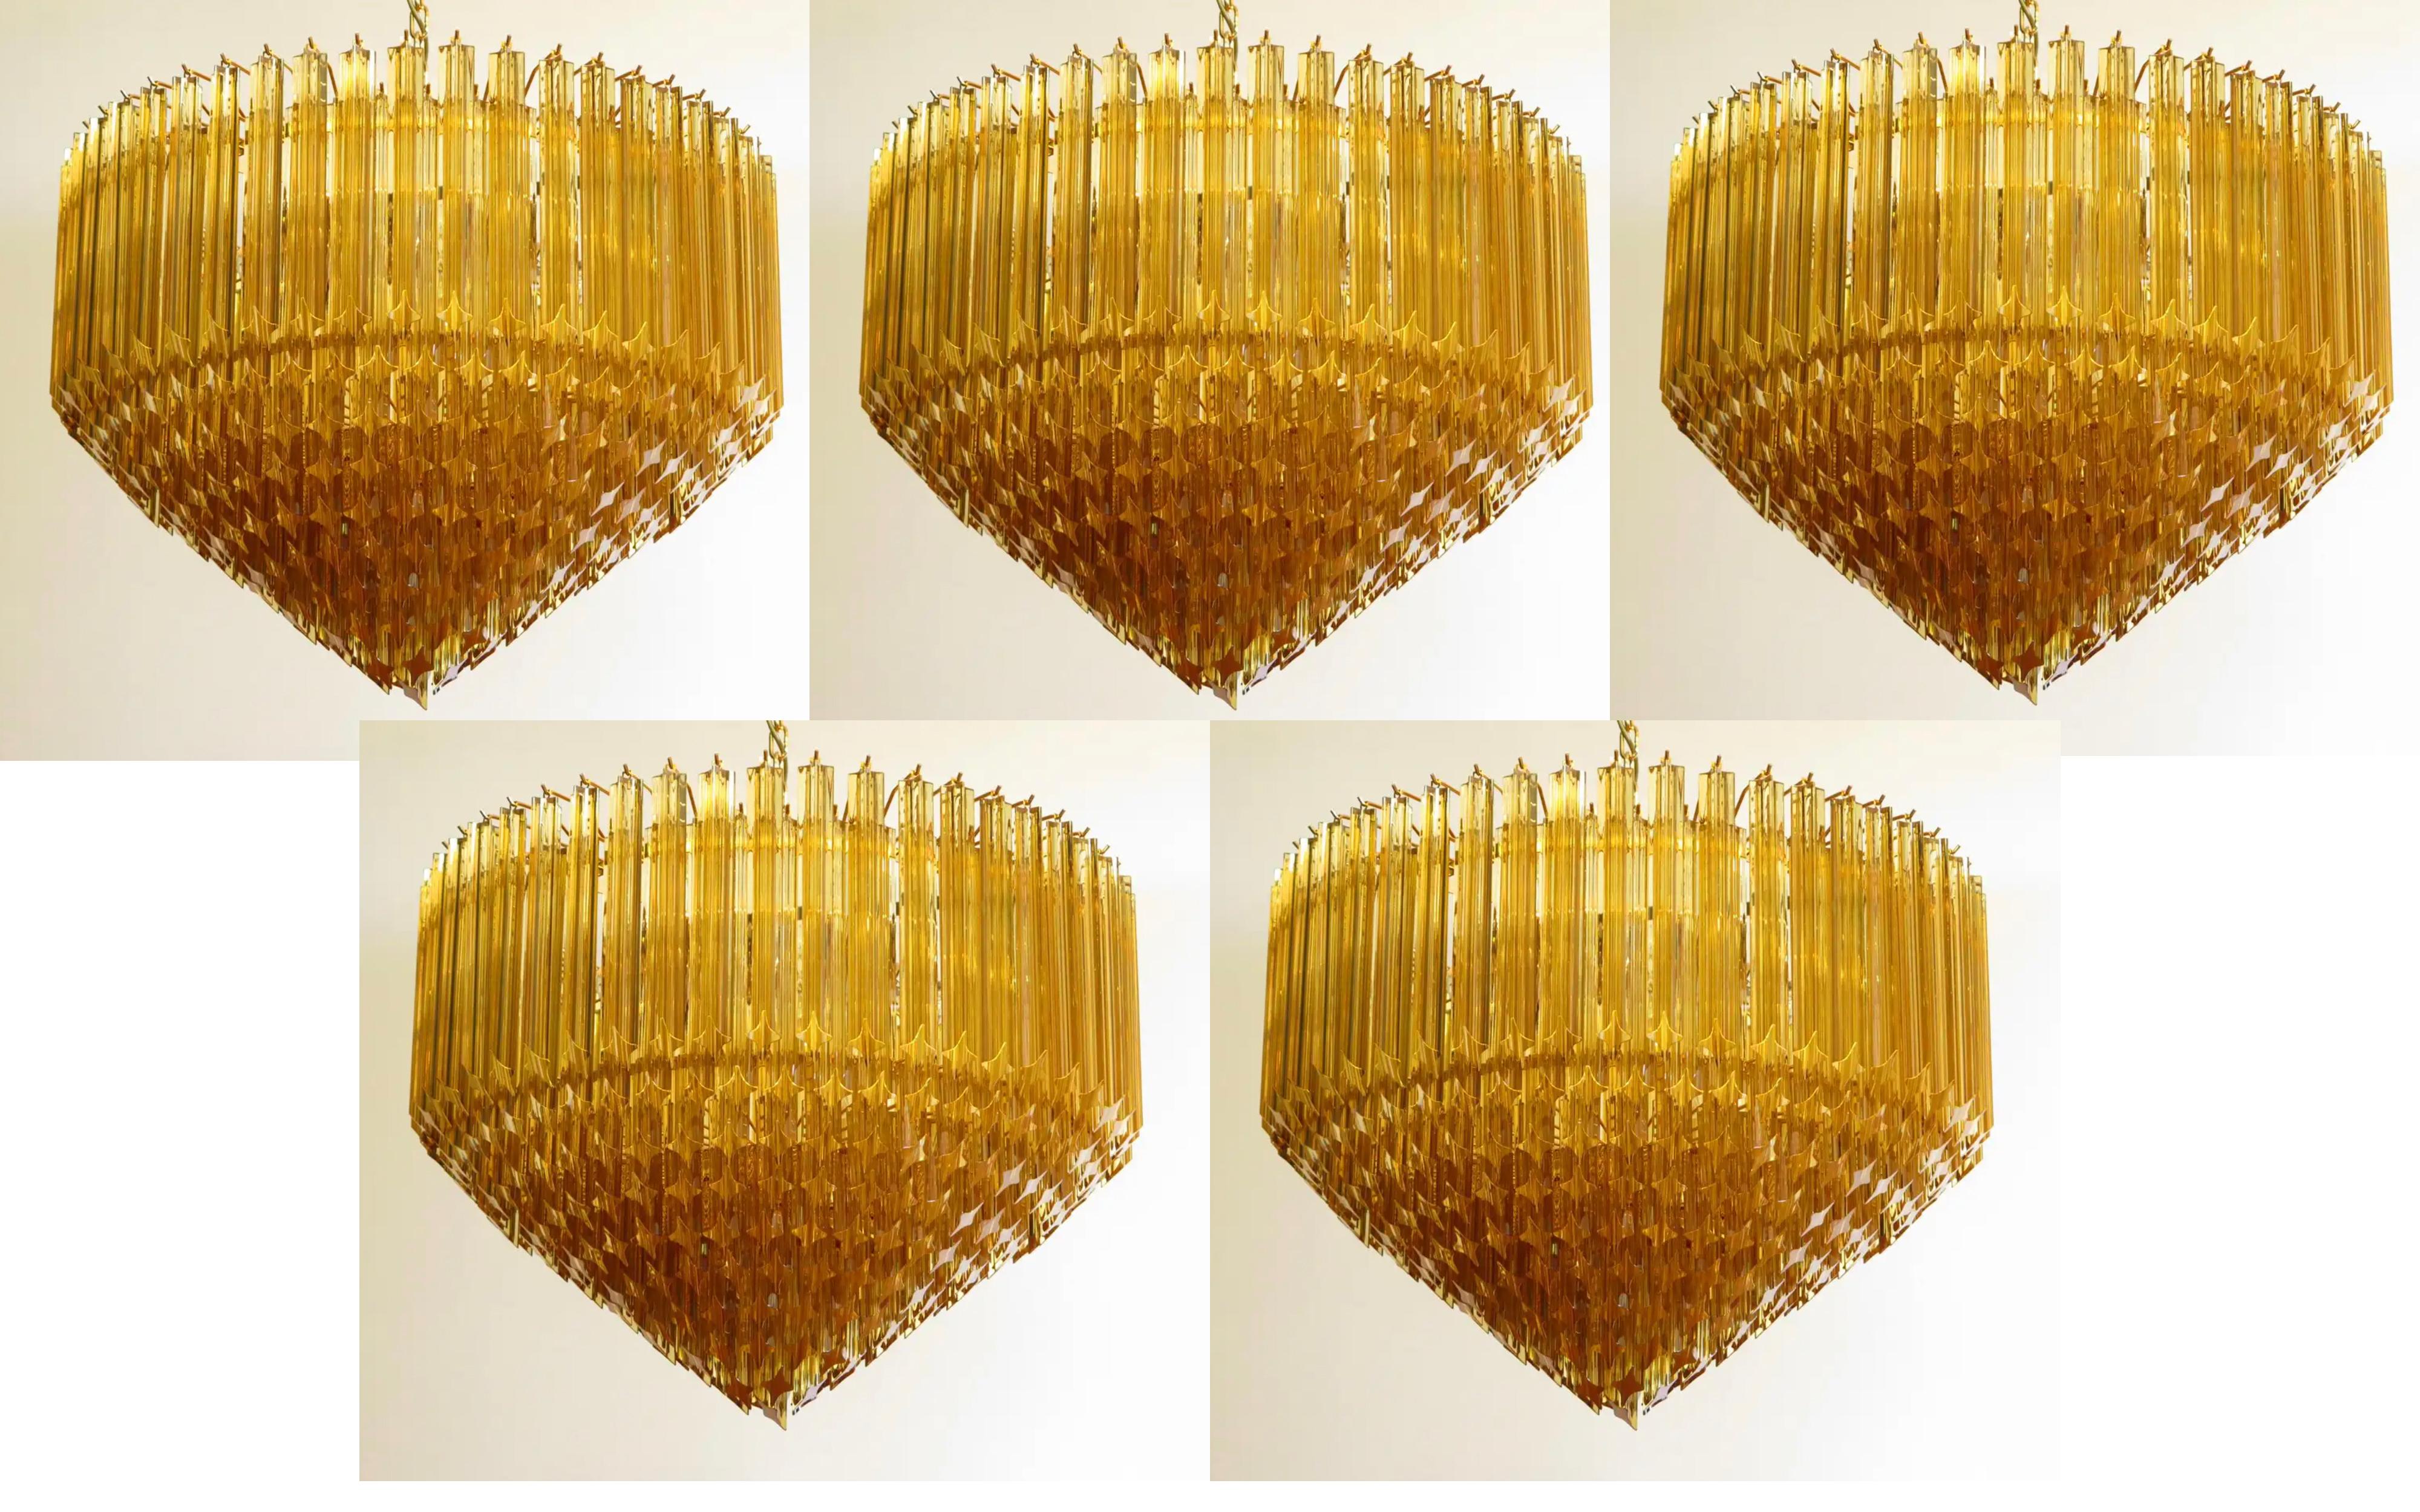 A magnificent Murano glass chandelier, 265 amber quadriedri on gold frame. This large midcentury Italian chandelier is truly a timeless classic. New product, prompt delivery.
Dimensions: 57.10 inches (145 cm) height with chain; 25.60 inches (65 cm)